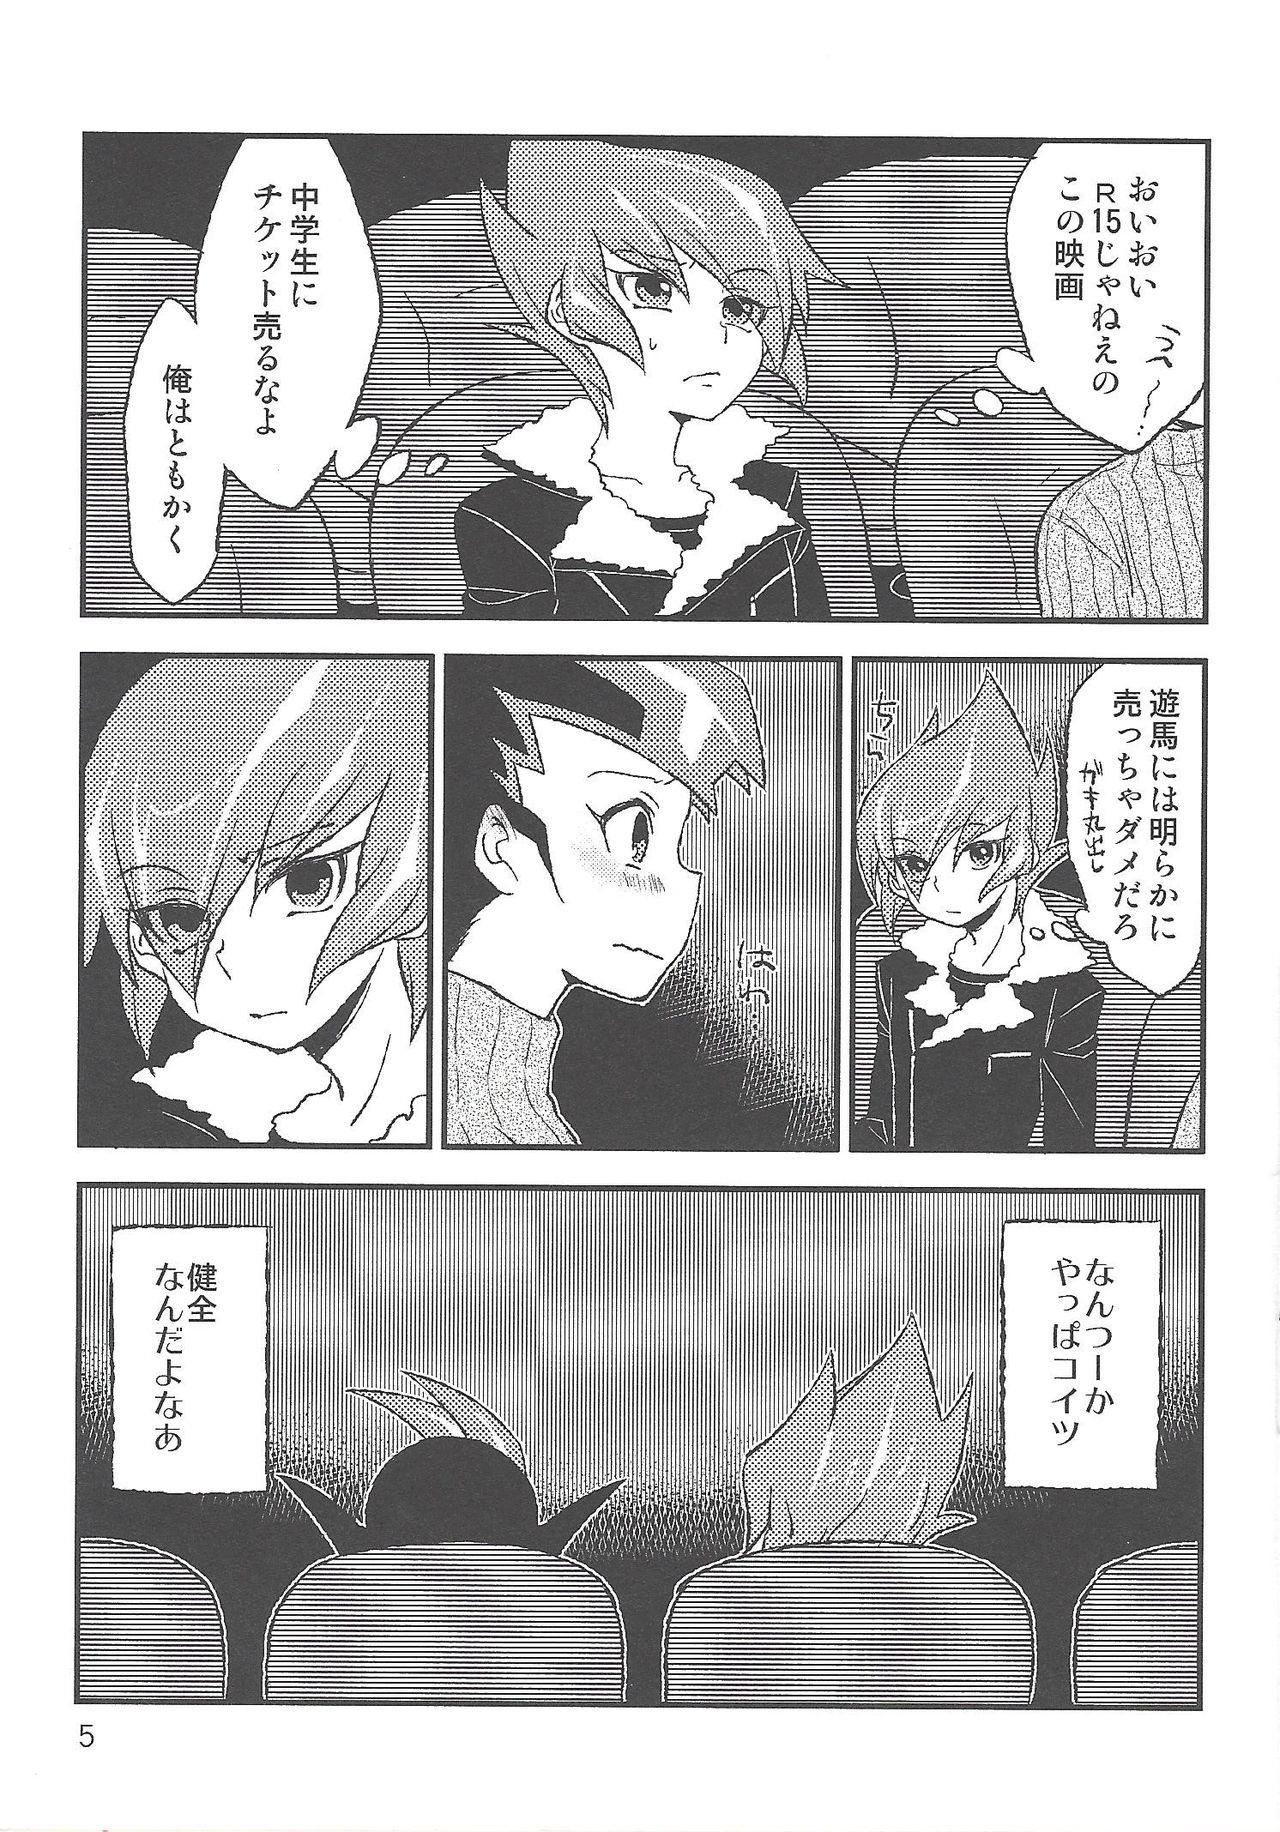 Woman INSTANT ROOM - Yu-gi-oh zexal Awesome - Page 6